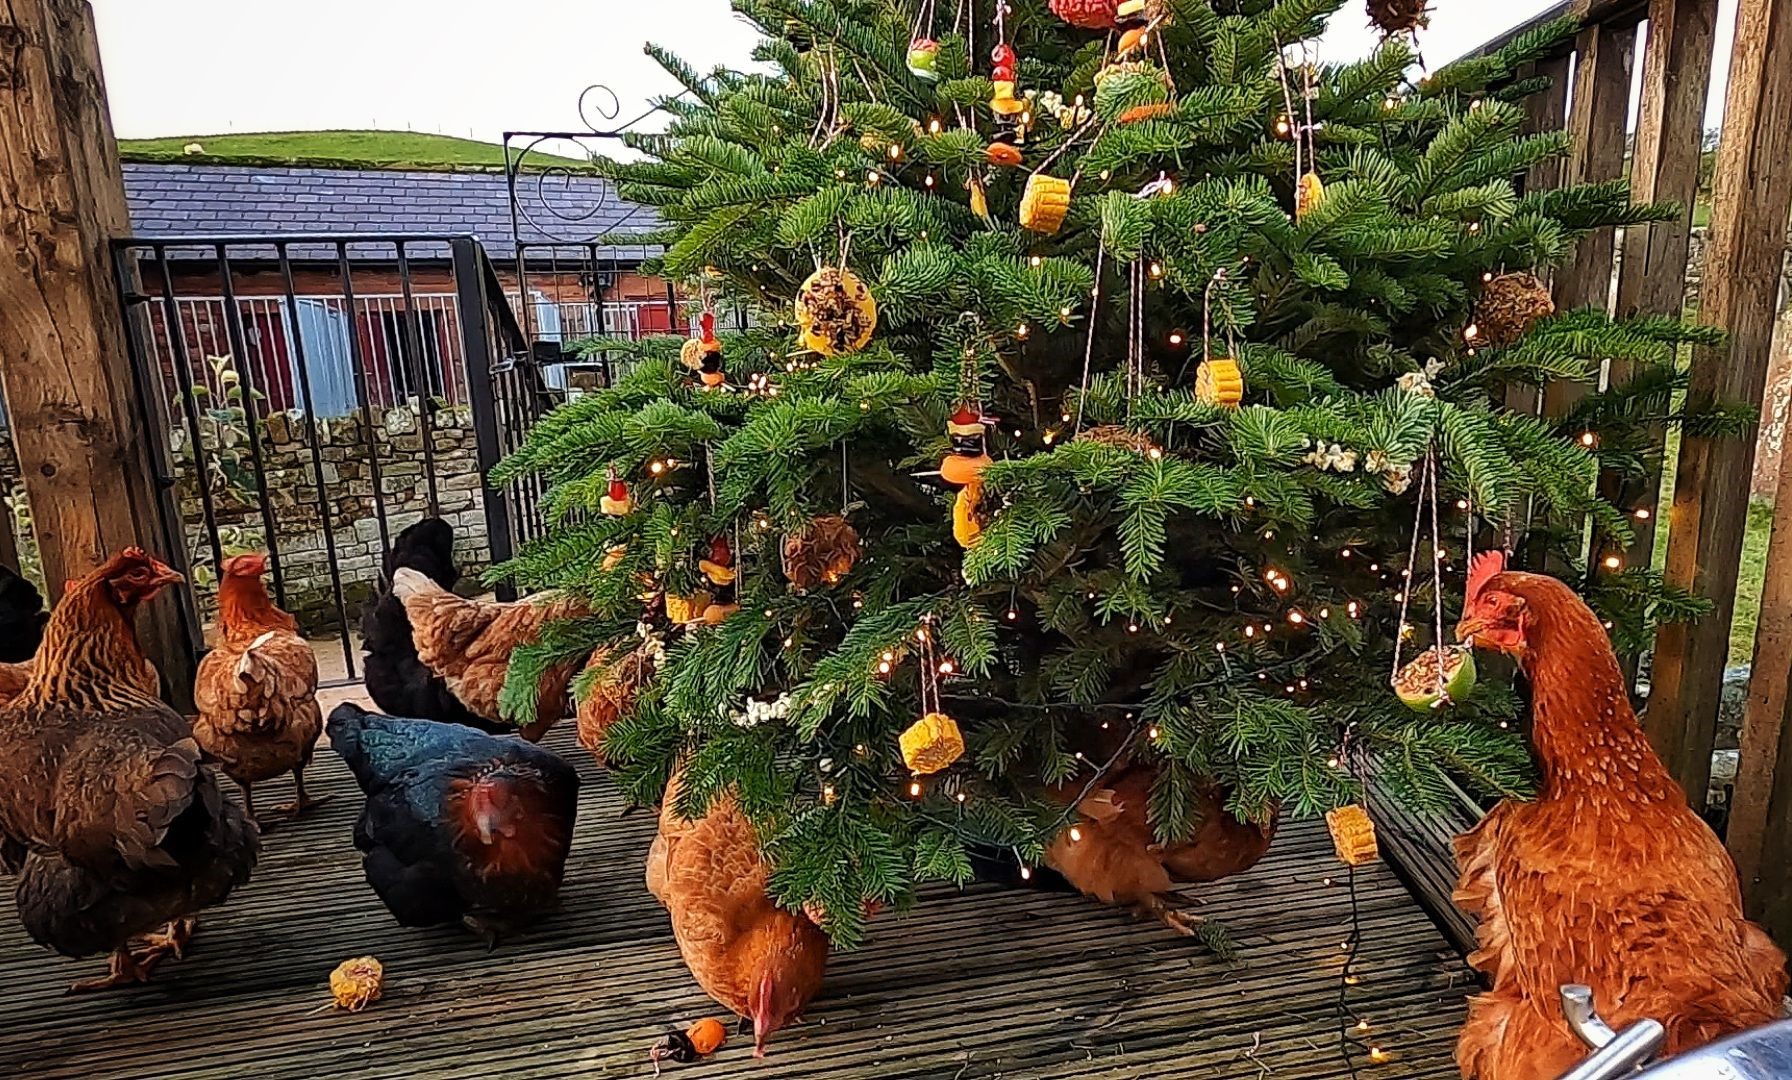 Hannah Jacksons Christmas tree from last year - full of edible baubles for her chickens and wild birds